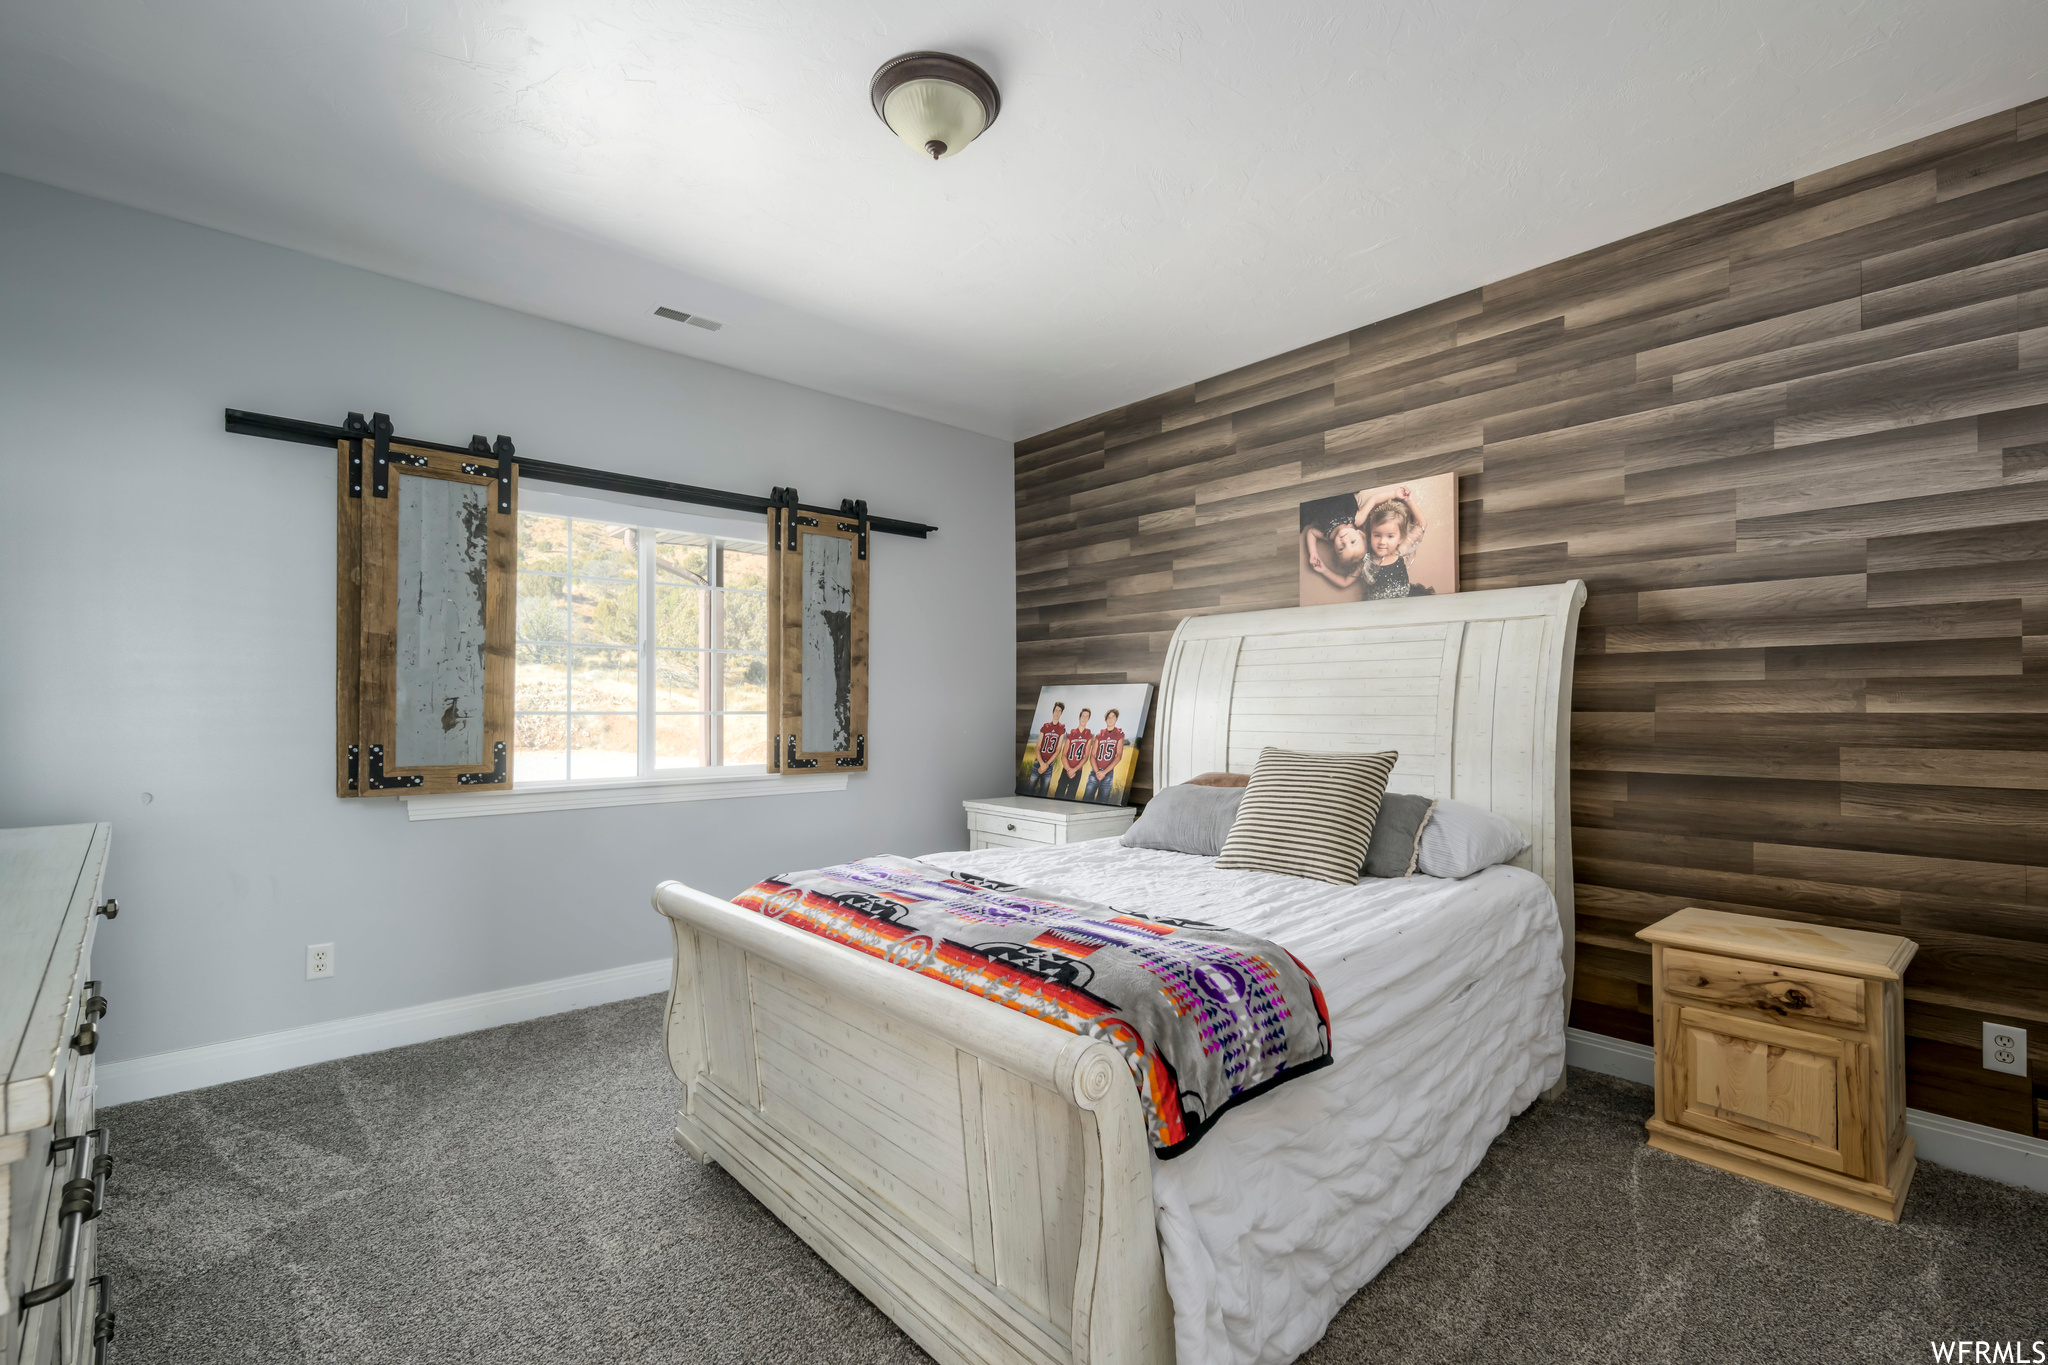 Carpeted bedroom featuring a barn door and wood walls